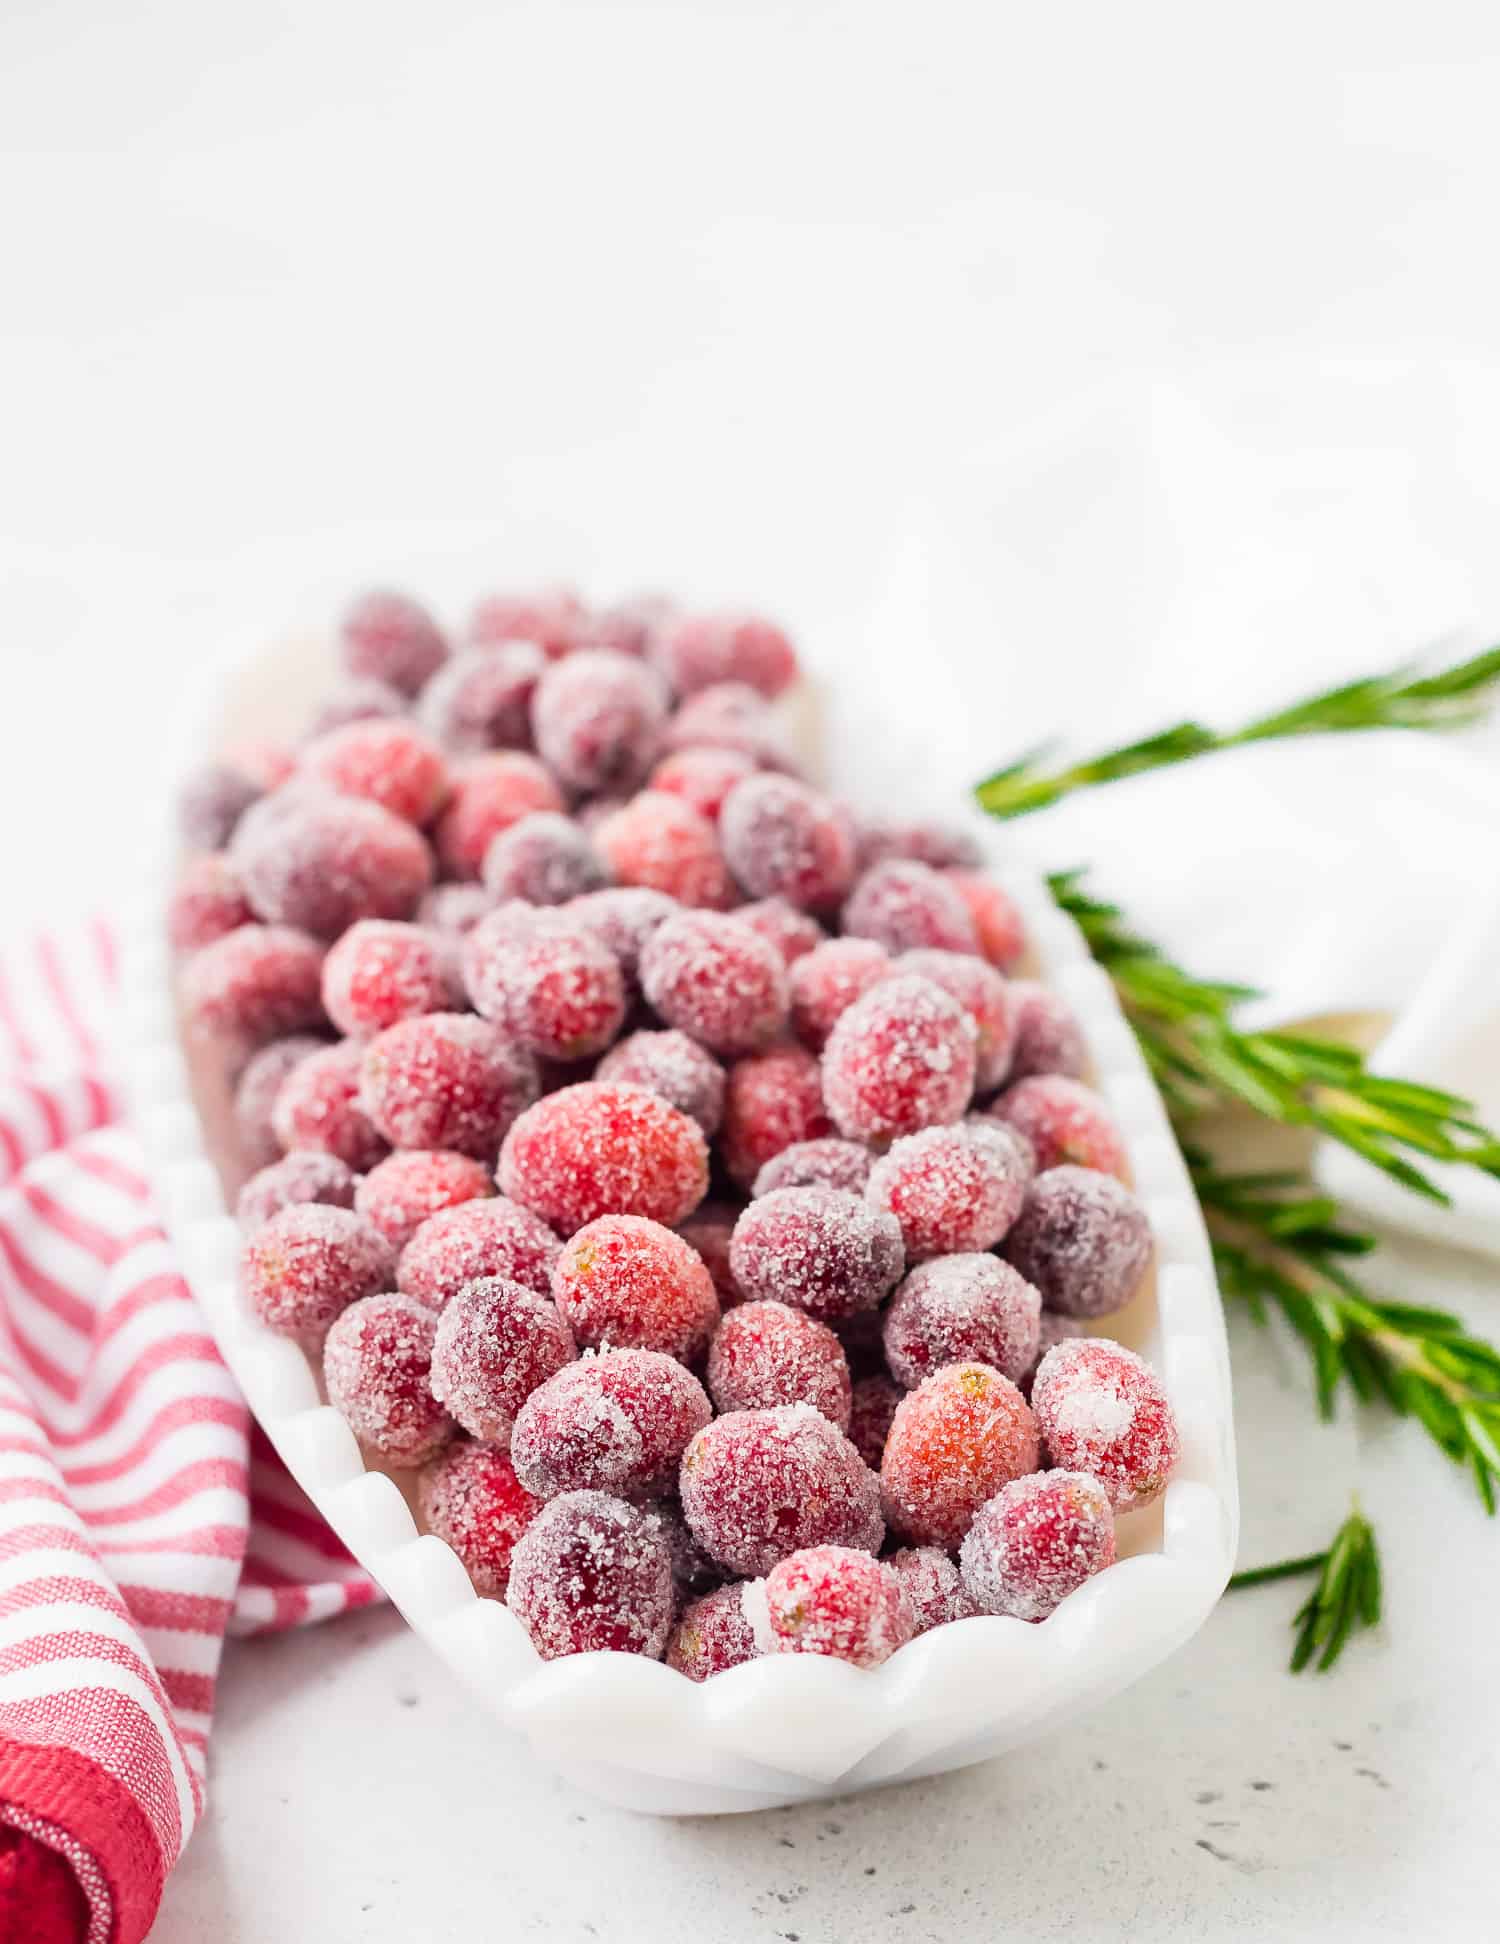 Sugared cranberries in a white bowl, garnished with sprigs of rosemary.